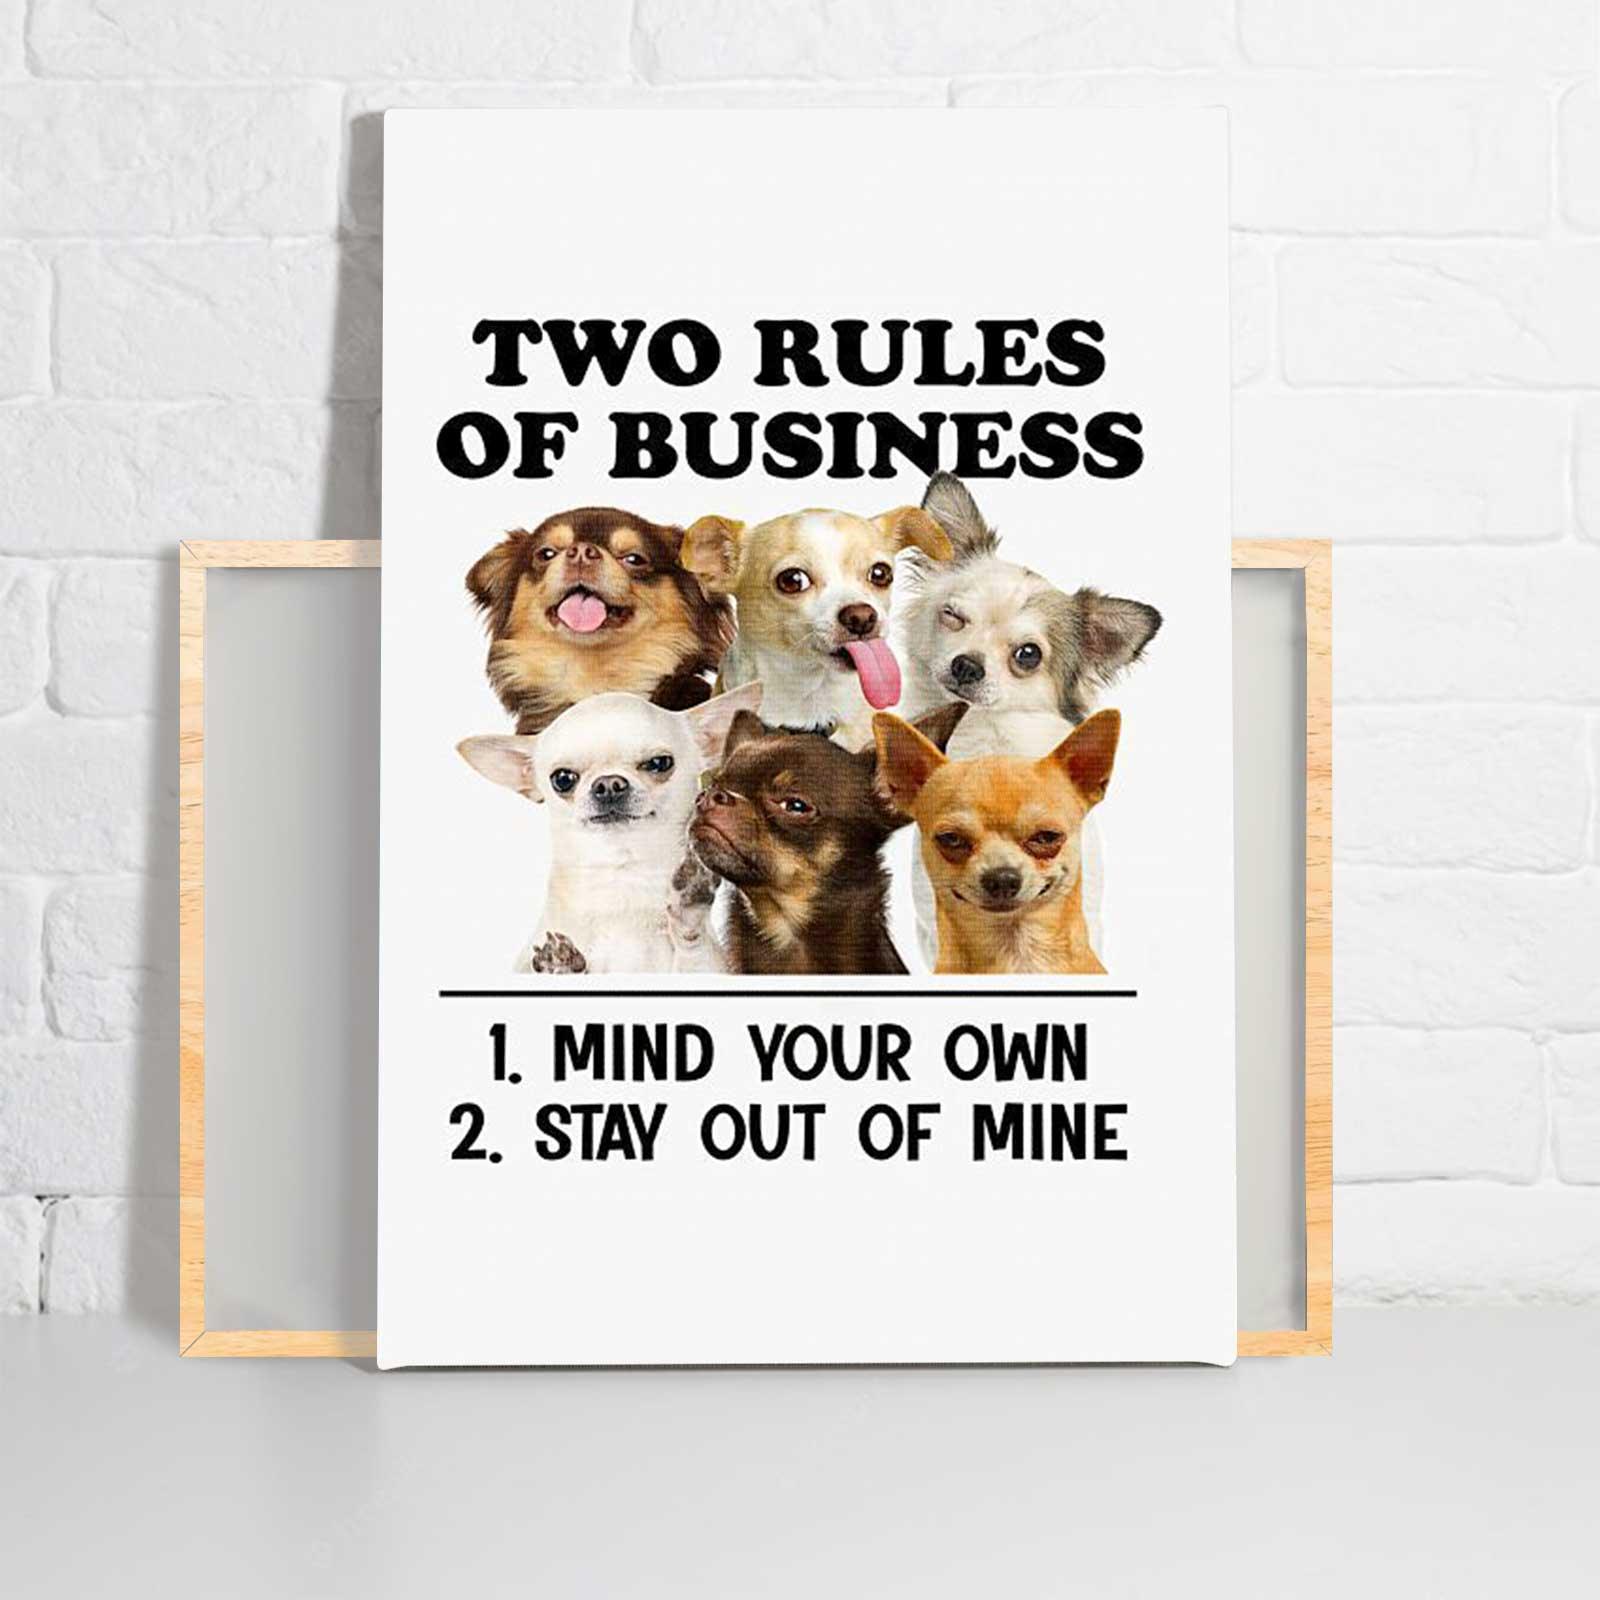 Chihuahua Portrait Canvas - Chihuahua Two Rules Of Business Canvas - Gift For Chihuahua Lovers, Family, Friends - Amzanimalsgift